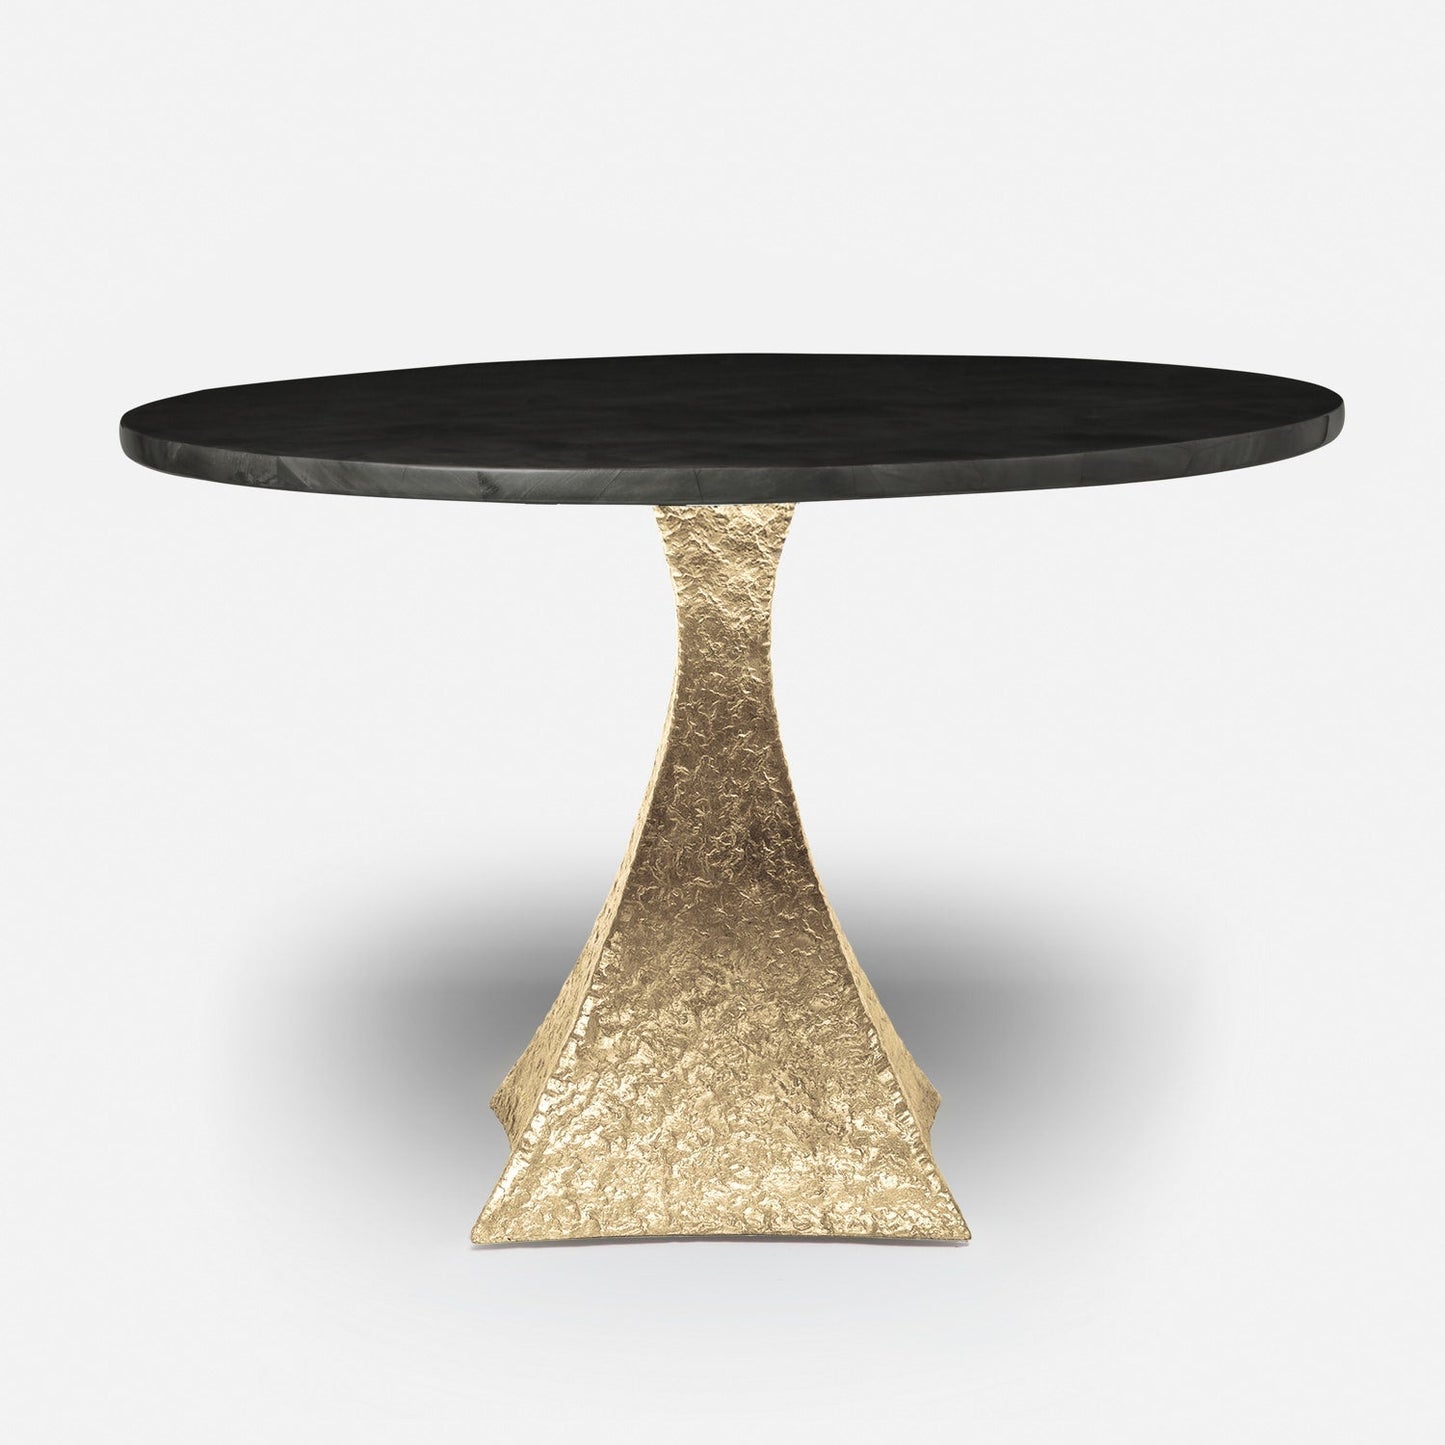 Made Goods Noor 72" x 30" Bumpy Cool Gold Iron Dinning Table With Round Dark Faux Horn Table Top